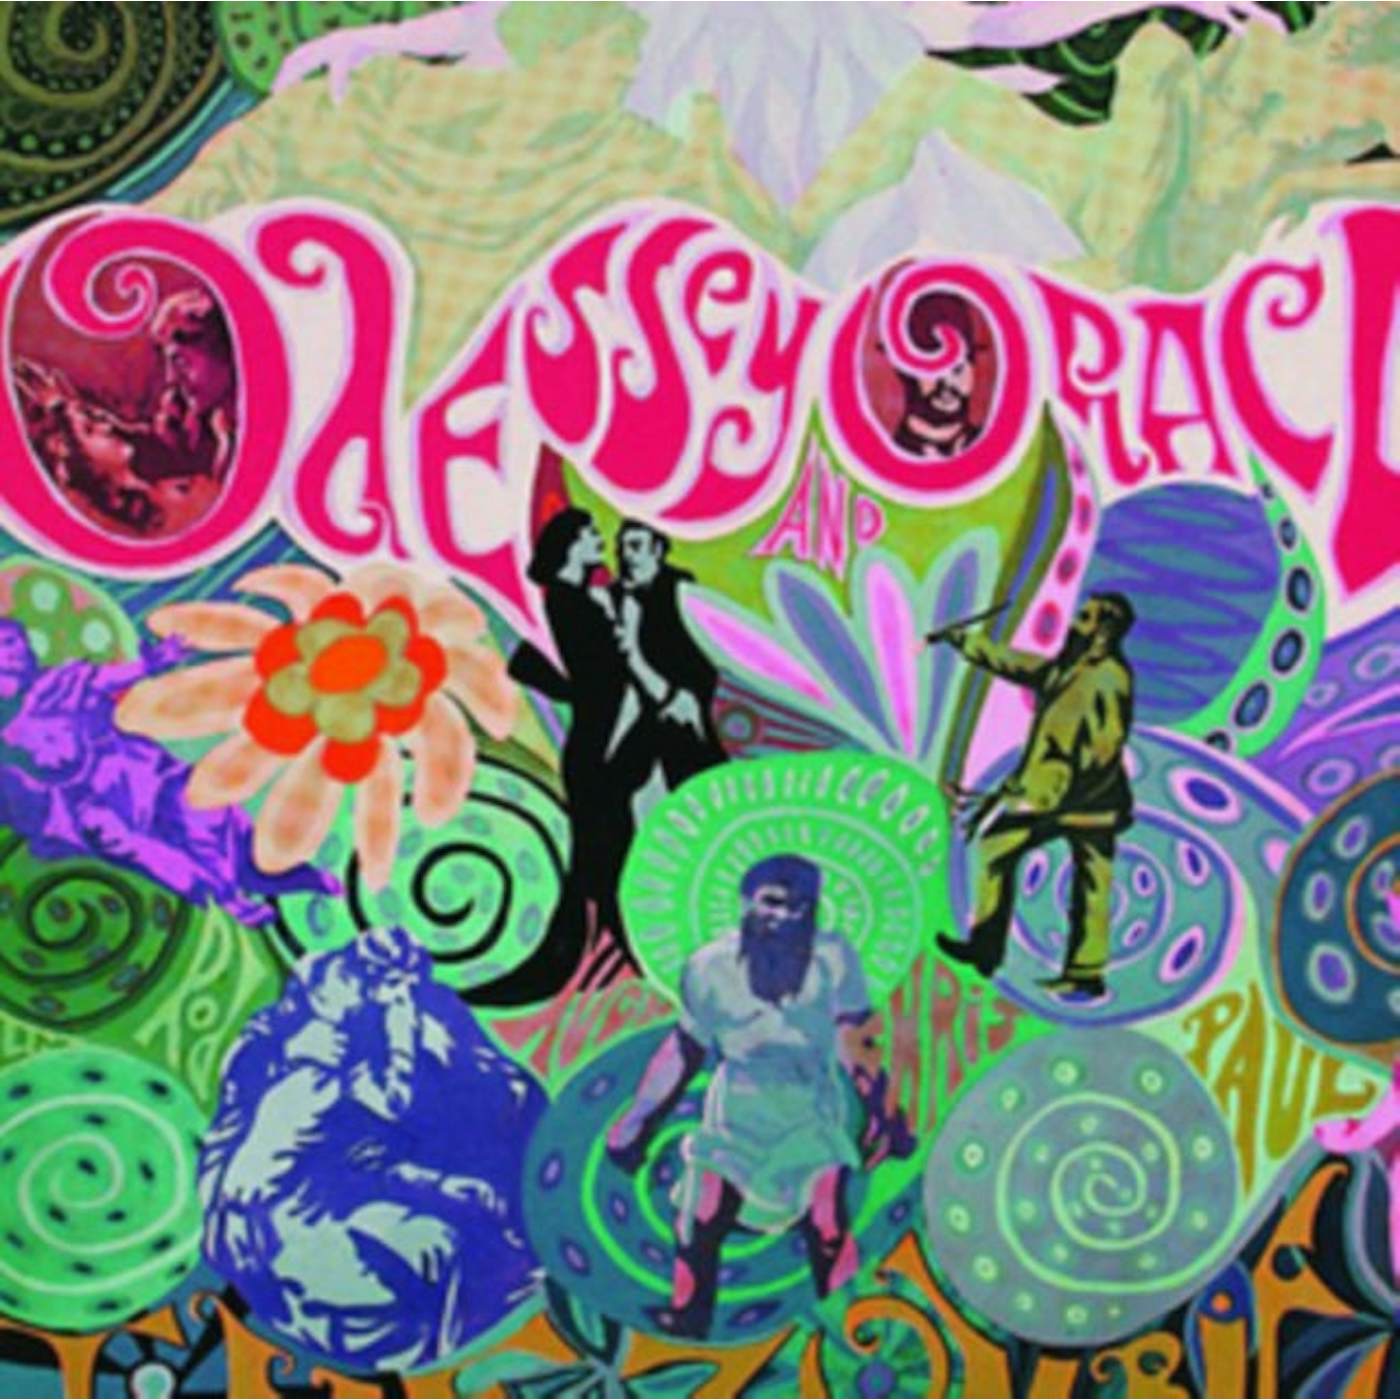 The Zombies LP Vinyl Record - Odessey And Oracle (Mono)